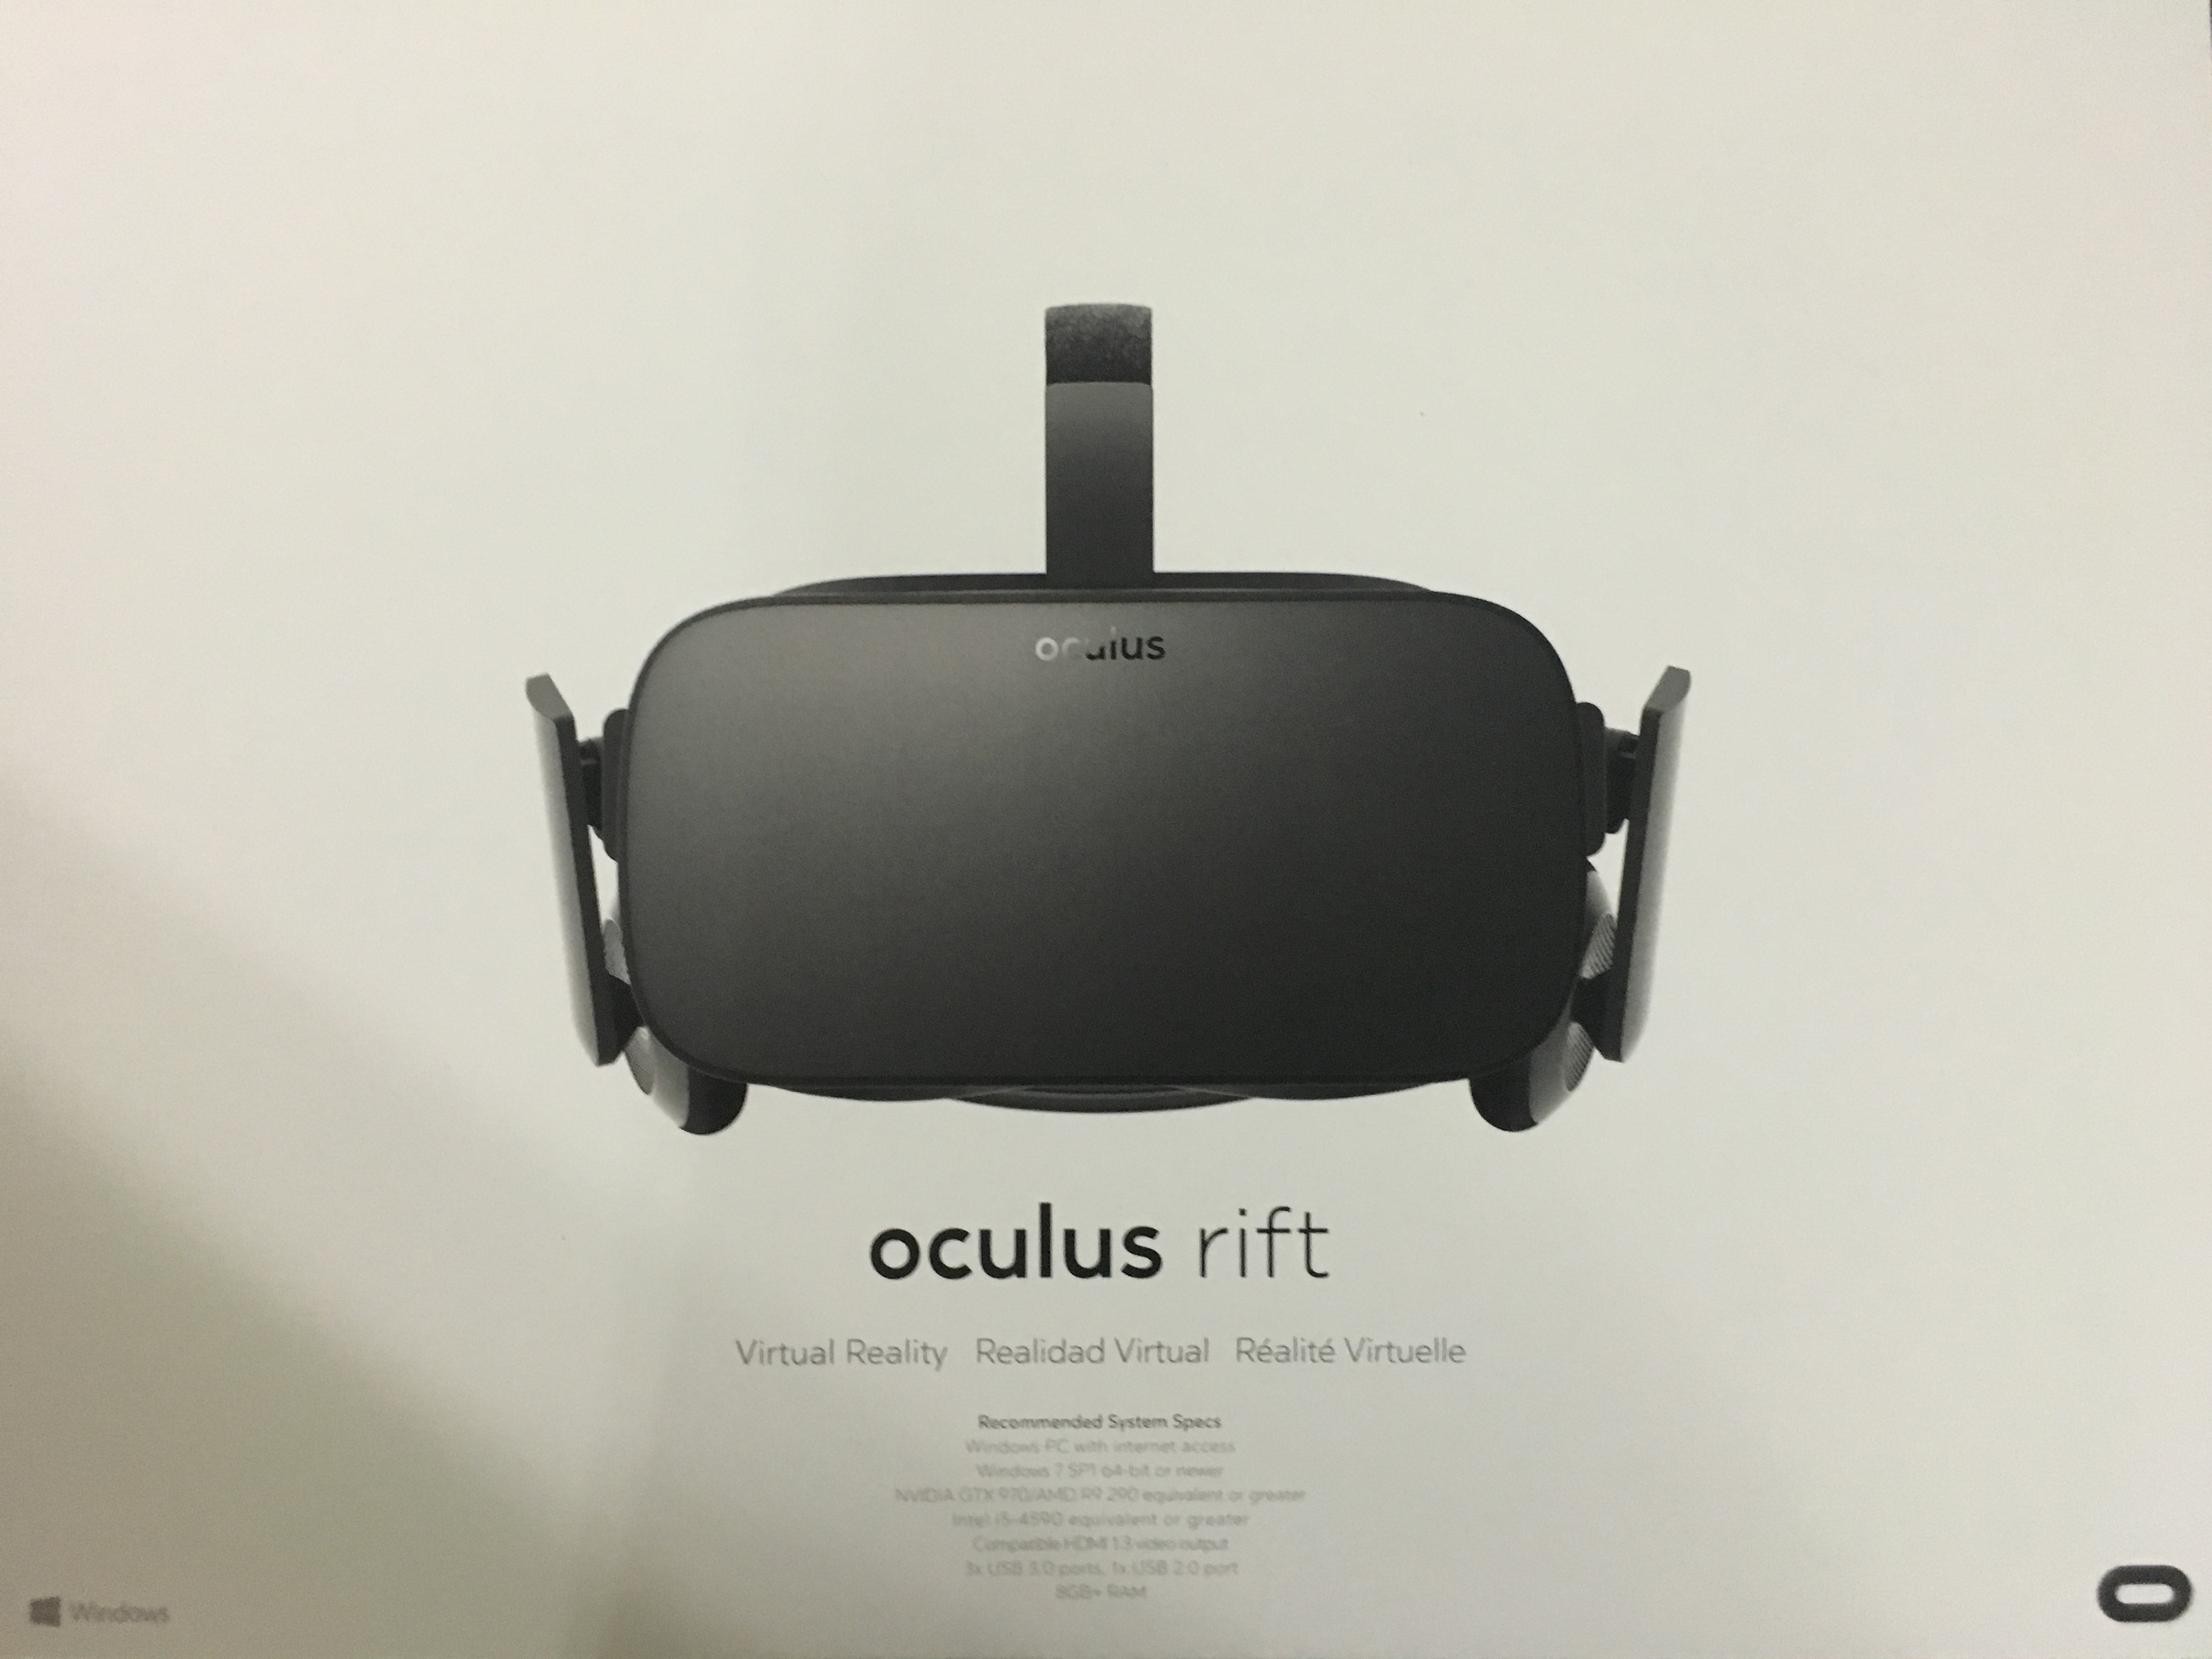 My Oculus Rift CV-1 Experience & Review: The Good, The Bad and The Ugly